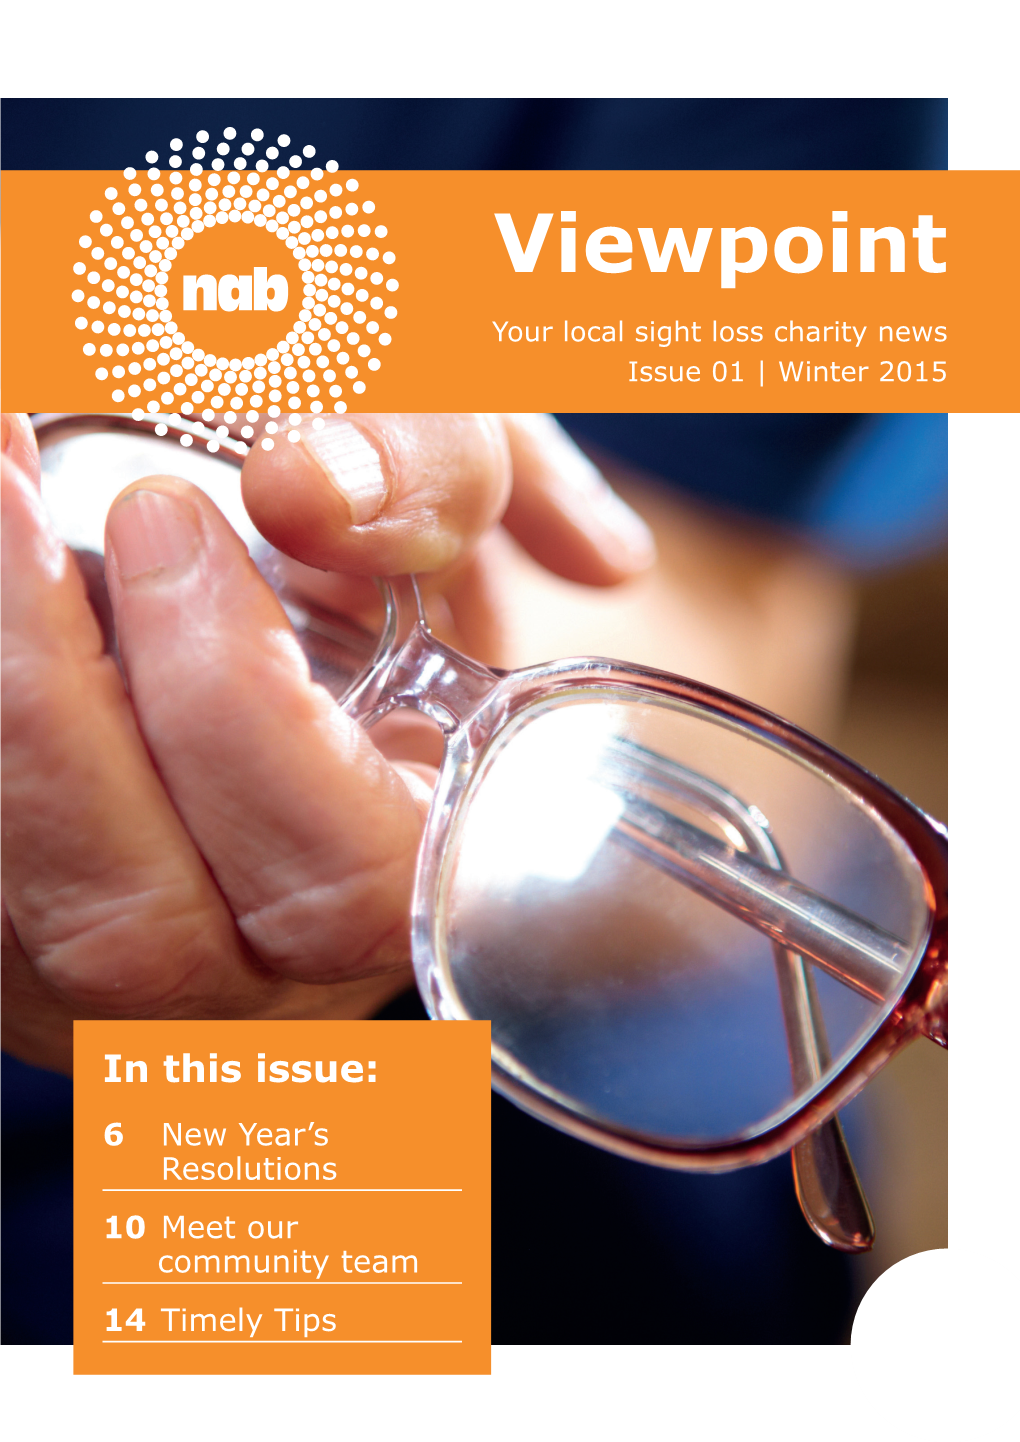 CL0277 NAB Viewpoint Winter 15.Indd